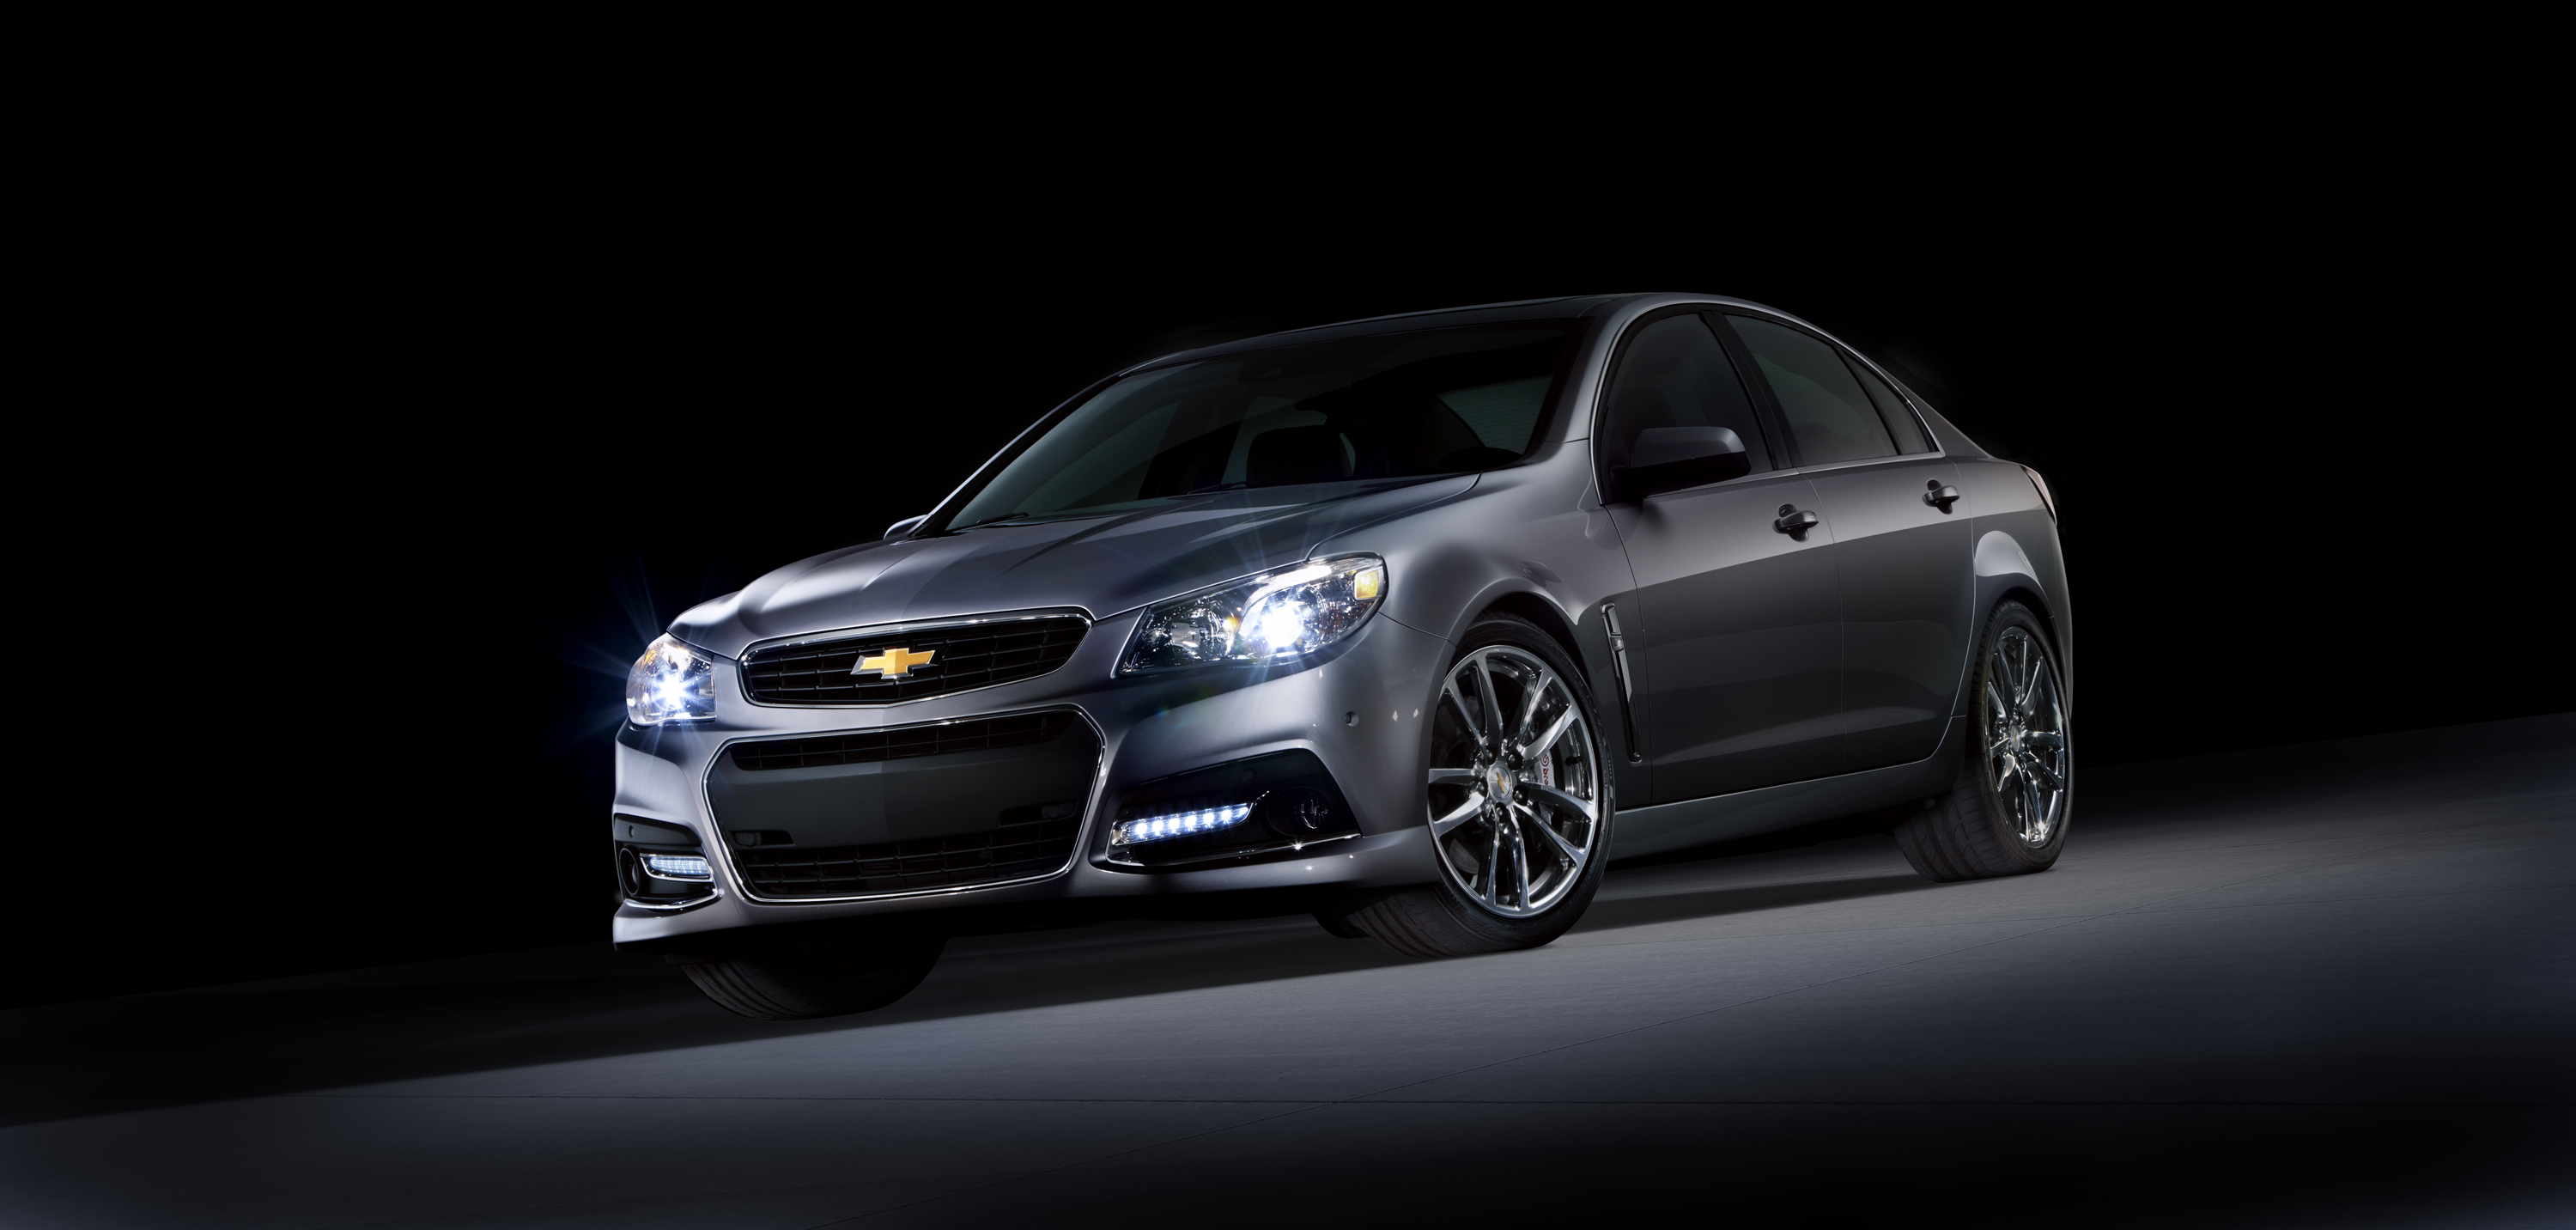 2014 Chevrolet SS: Performance Sedan with Racing DNA